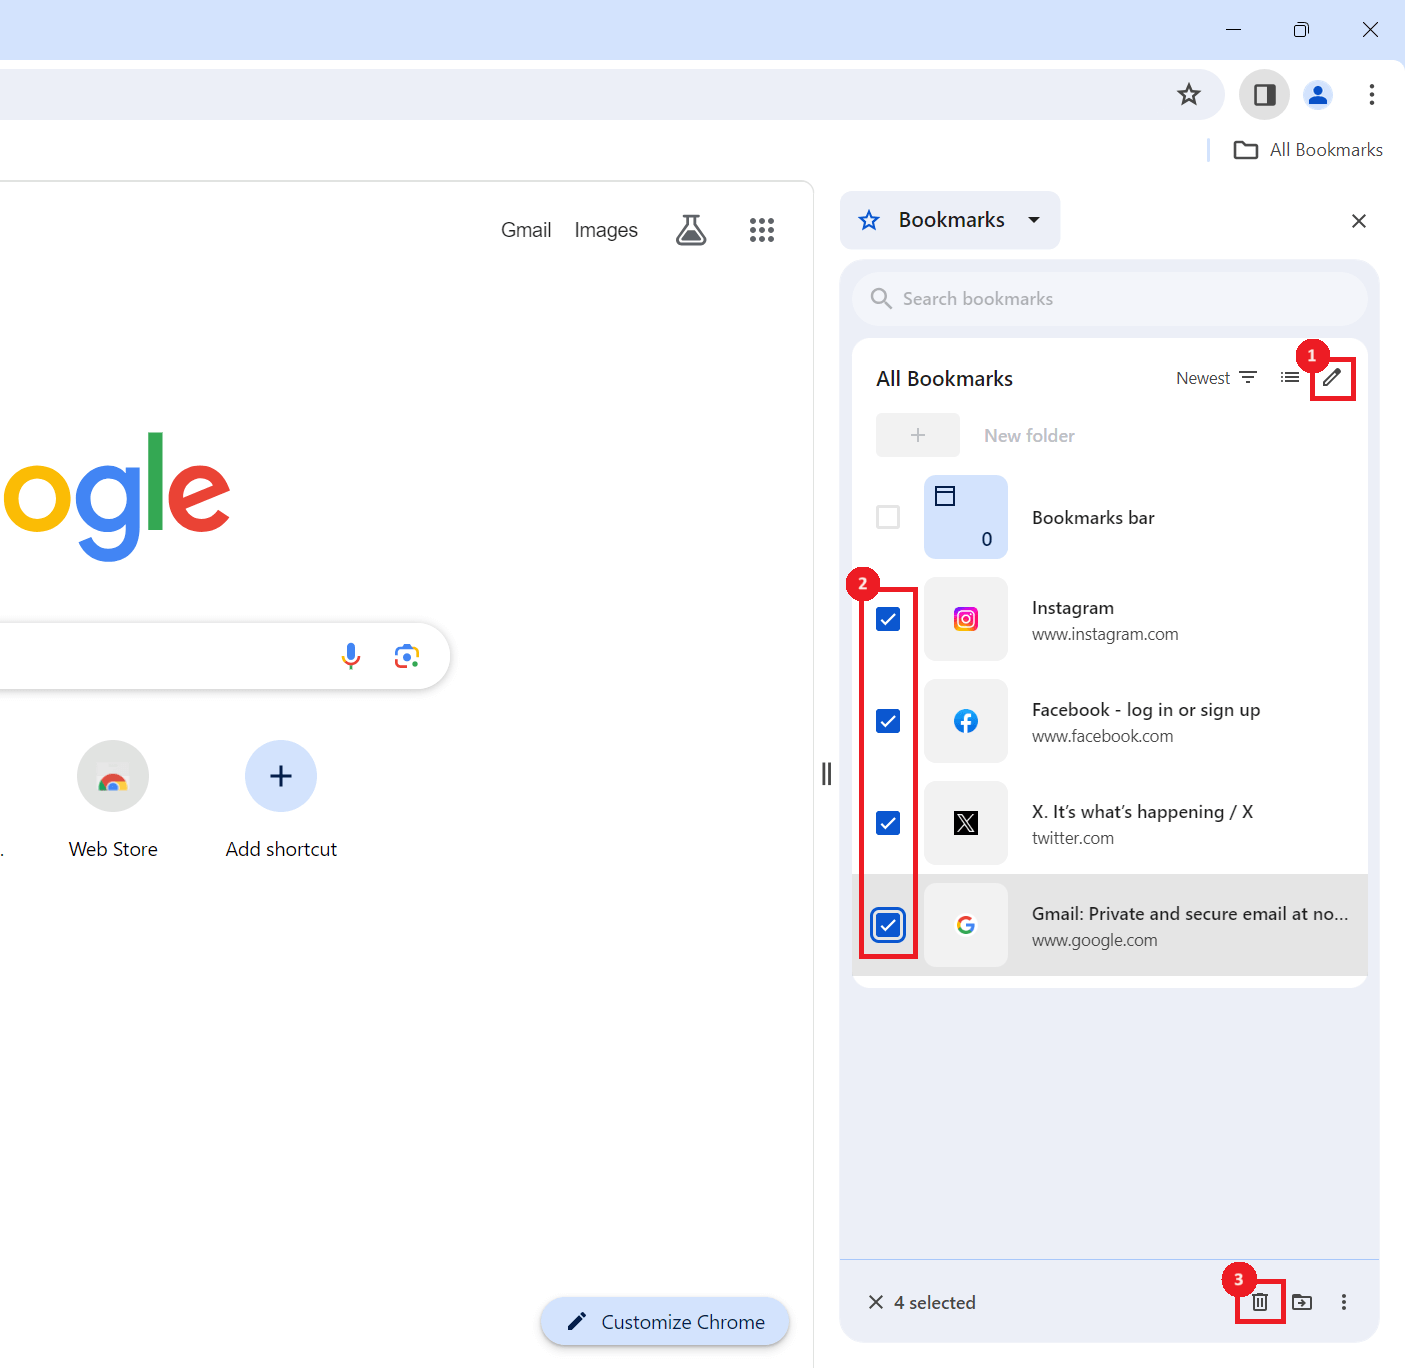 Selecting bookmarks in the Google Chrome Side Panel.